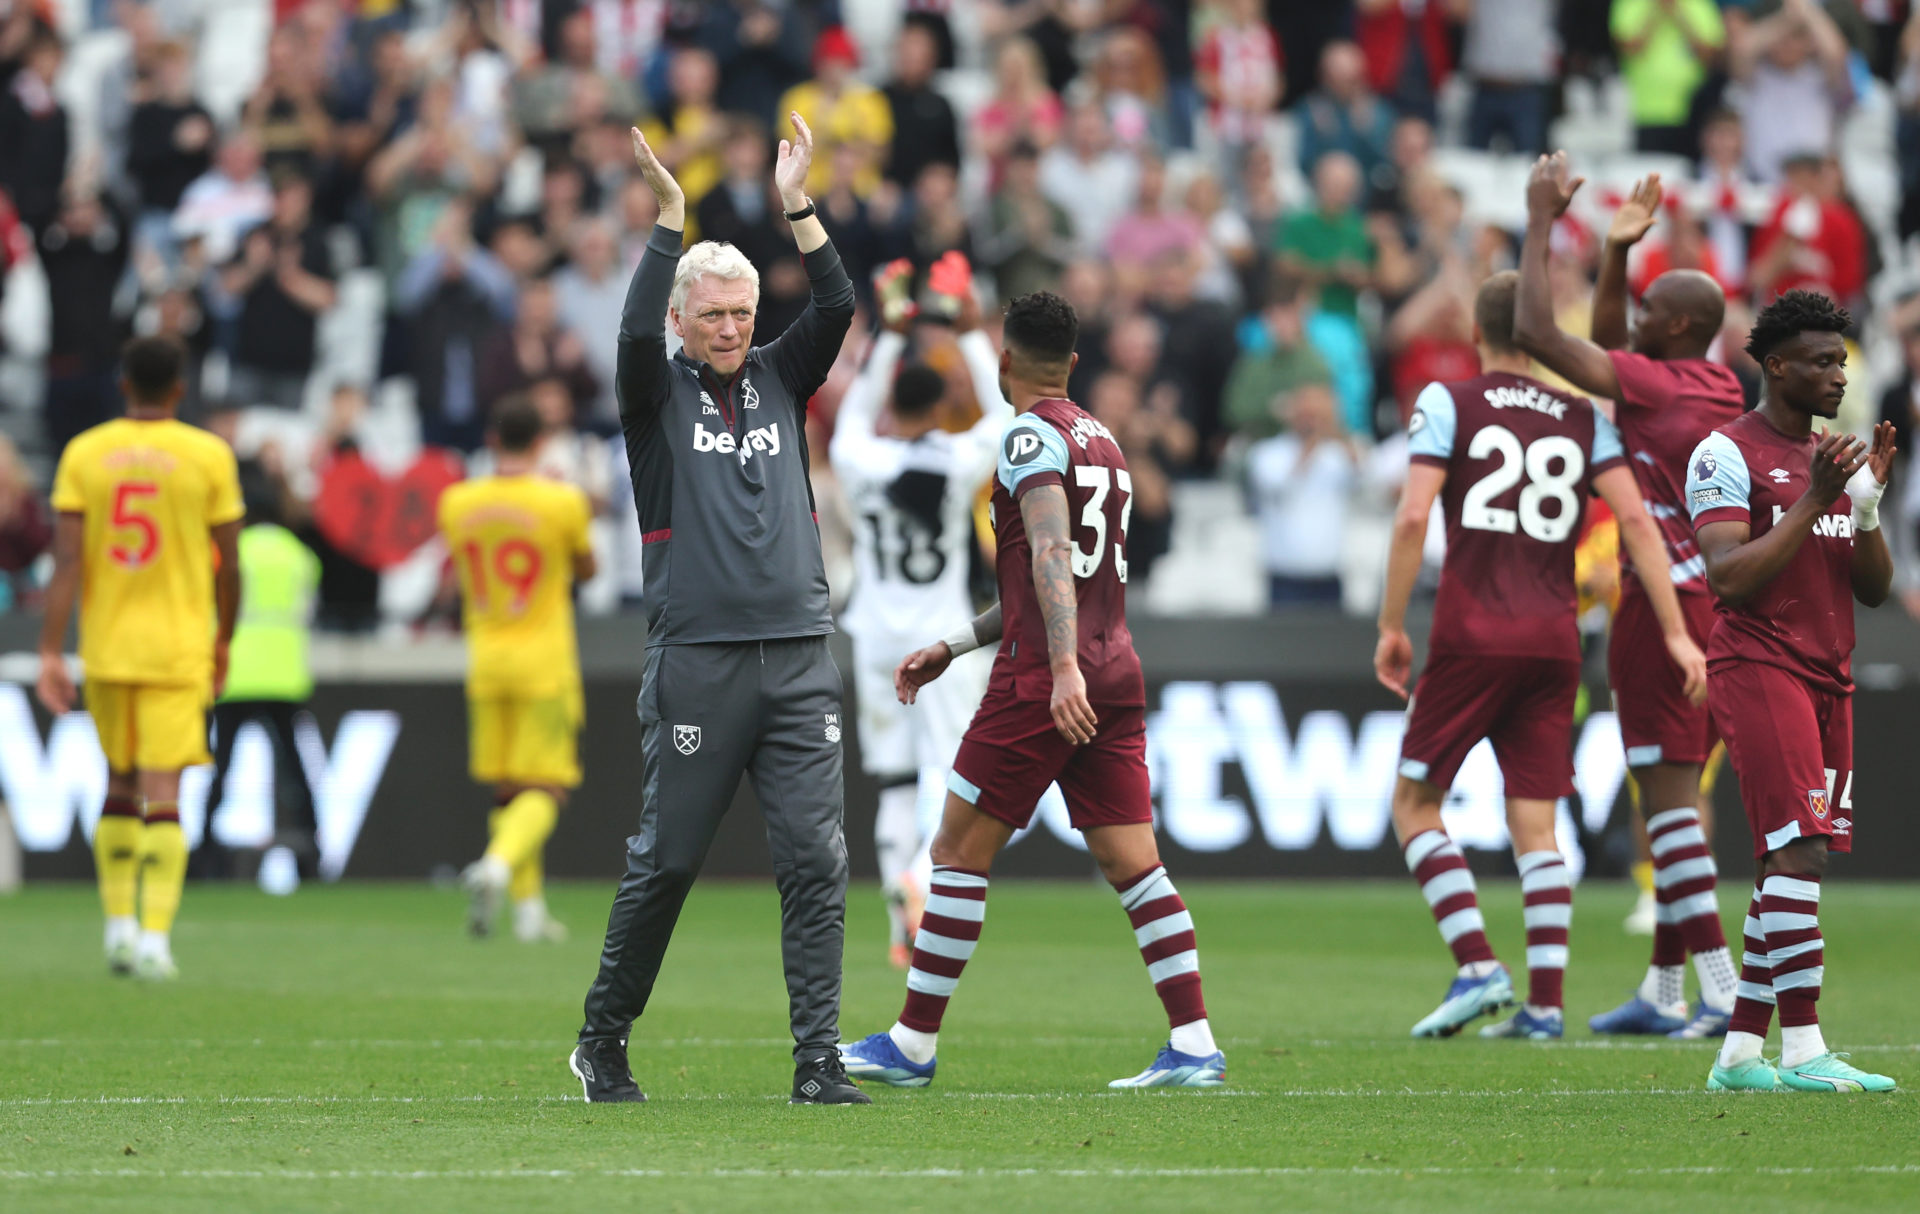 Tony Gale shares exact reason why ‘Moyes out’ crew will never fully warm to the West Ham boss